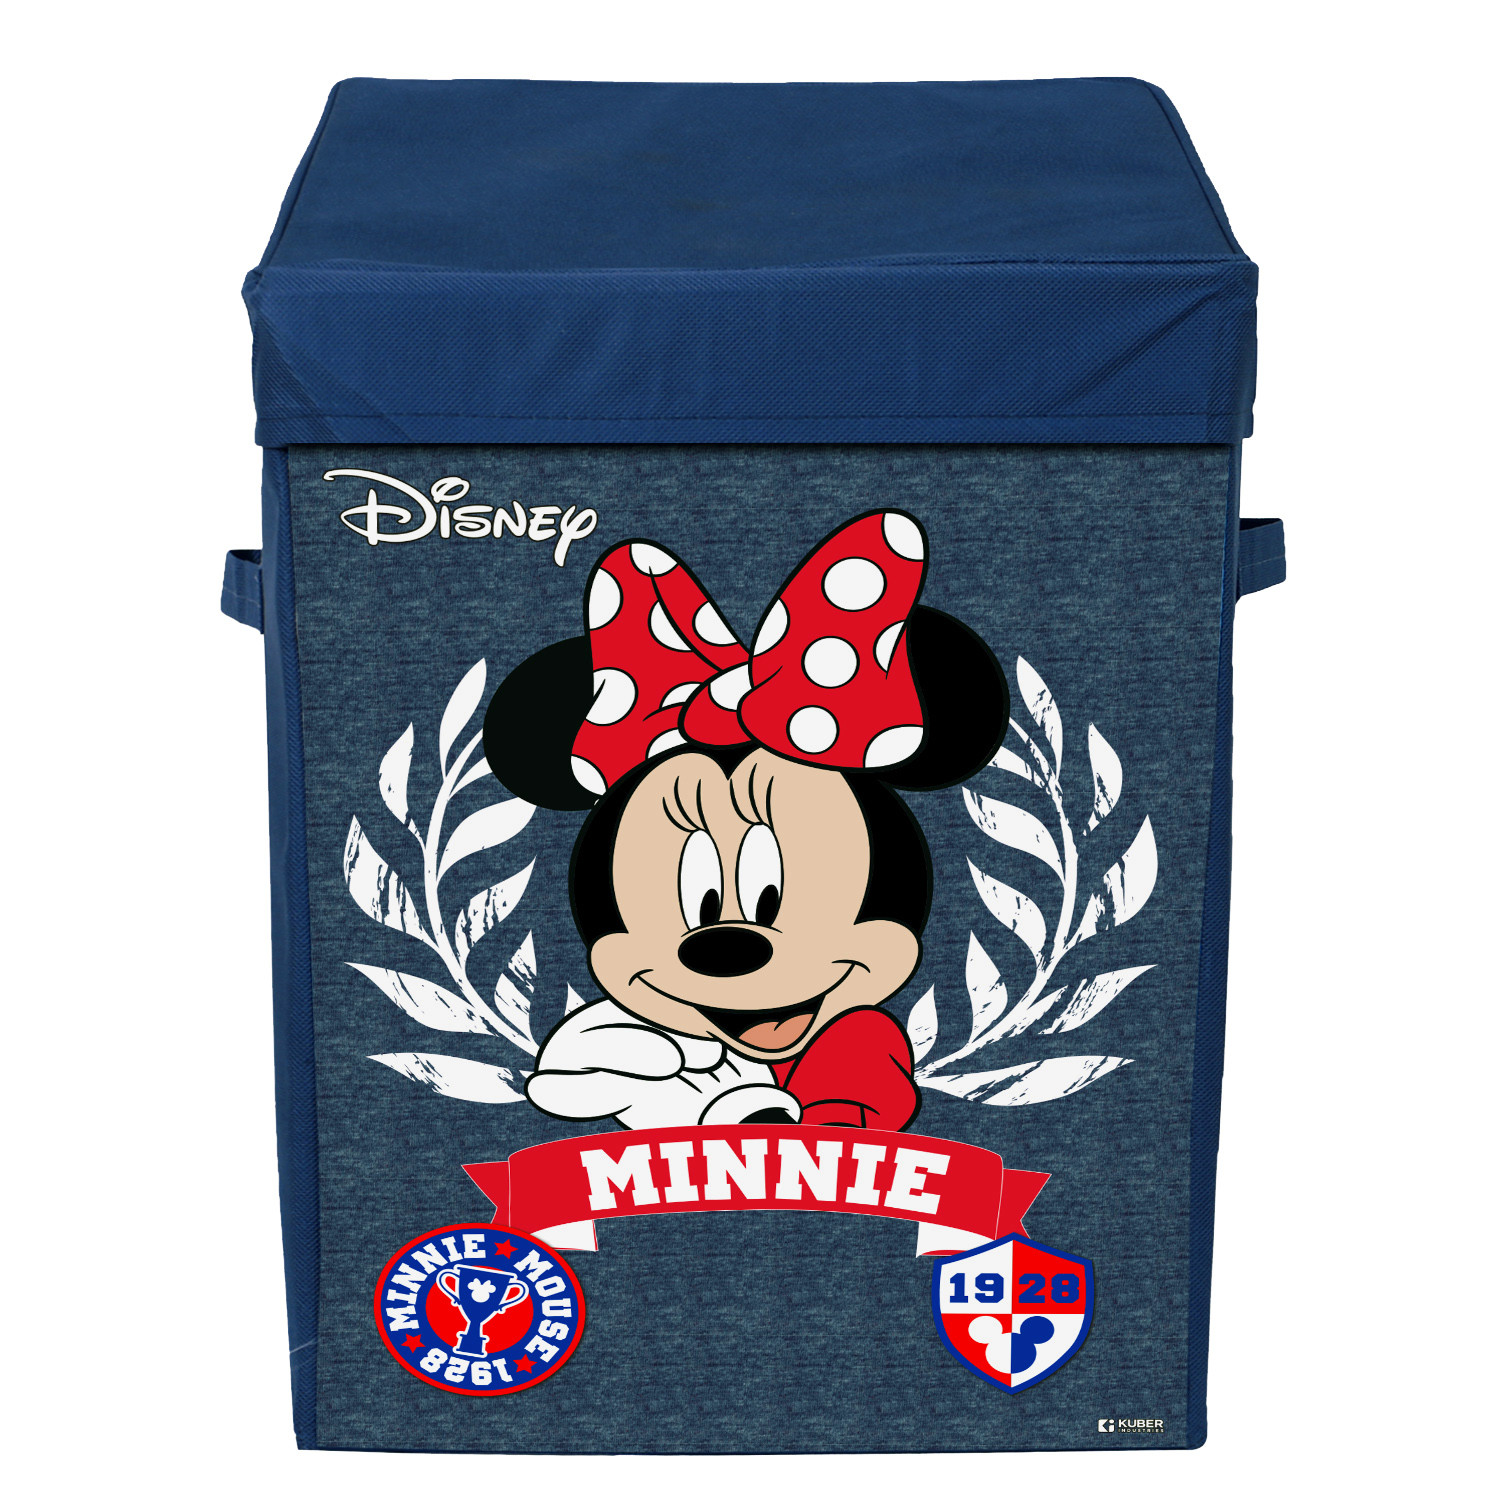 Kuber Industries Disney Minnie Print Foldable Laundry Basket|Clothes Storage Basket With Handle & Lid,60 Ltr.(Navy Blue)